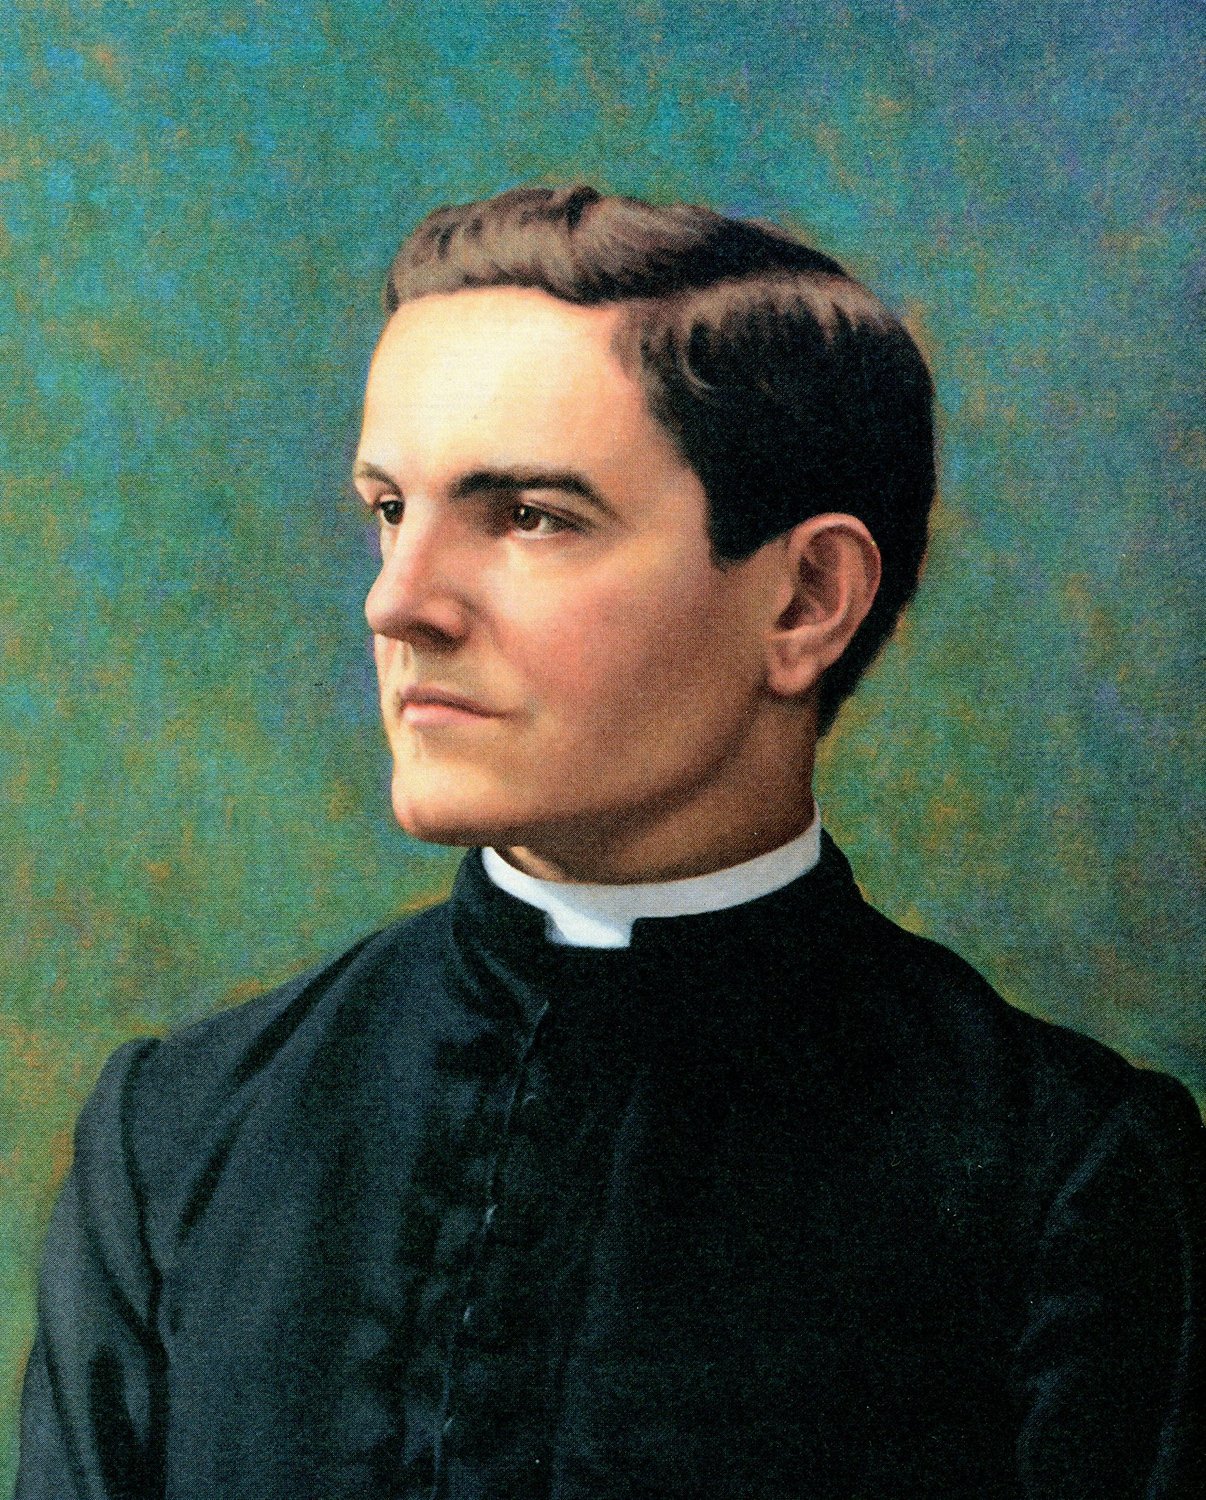 Father Michael McGivney, founder of the Knights of Columbus, is pictured in an undated portrait.